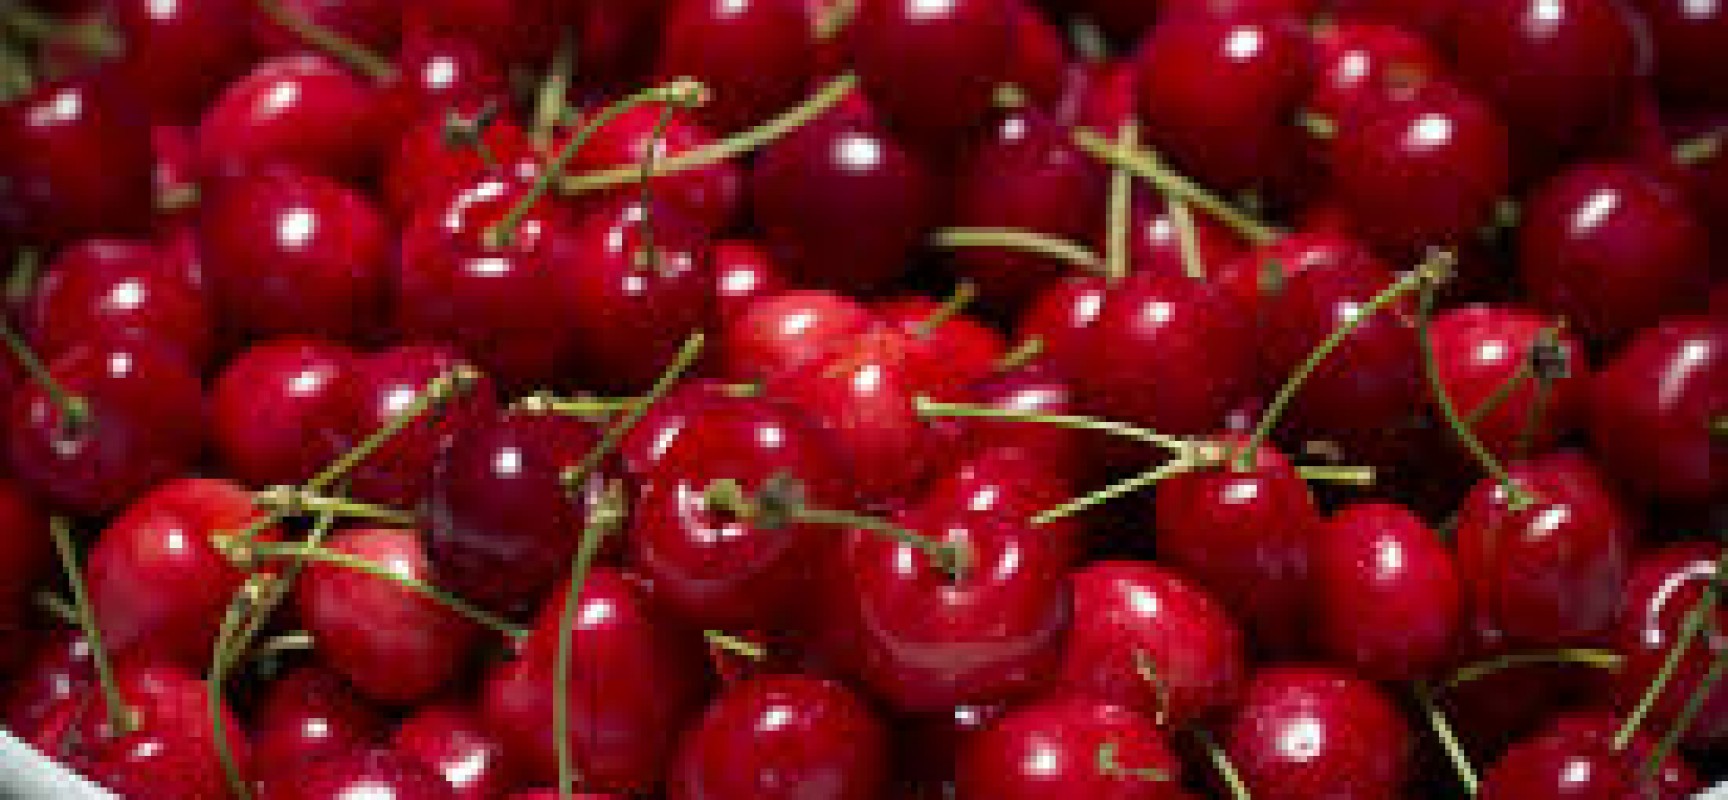 The Love For Cherry